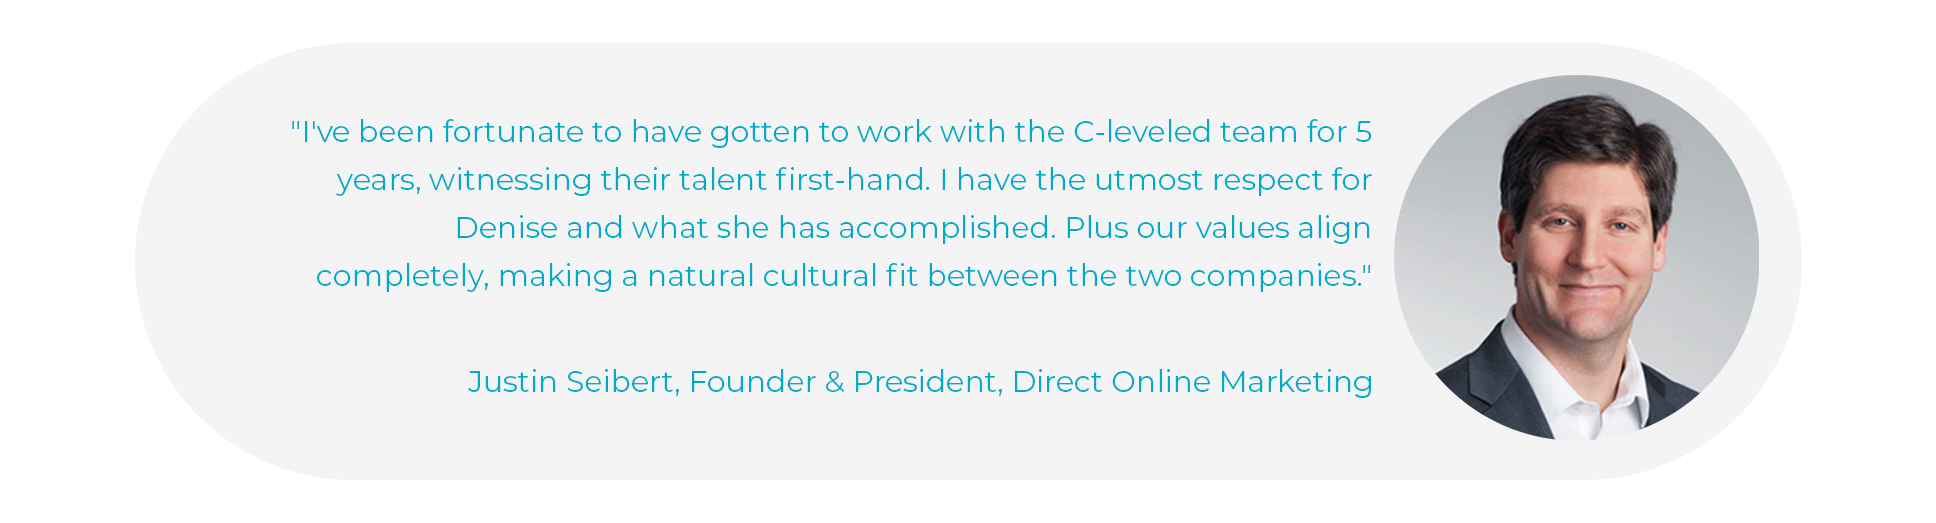 "I've been fortunate to have gotten to work with the C-leveled team for 5 years, witnessing their talent first-hand. I have the utmost respect for Denise and what she has accomplished," said Justin Seibert, Founder and President of Pittsburgh Digital Marketing Agency Direct Online Marketing. "Plus our values align completely, making a natural cultural fit between the two companies."